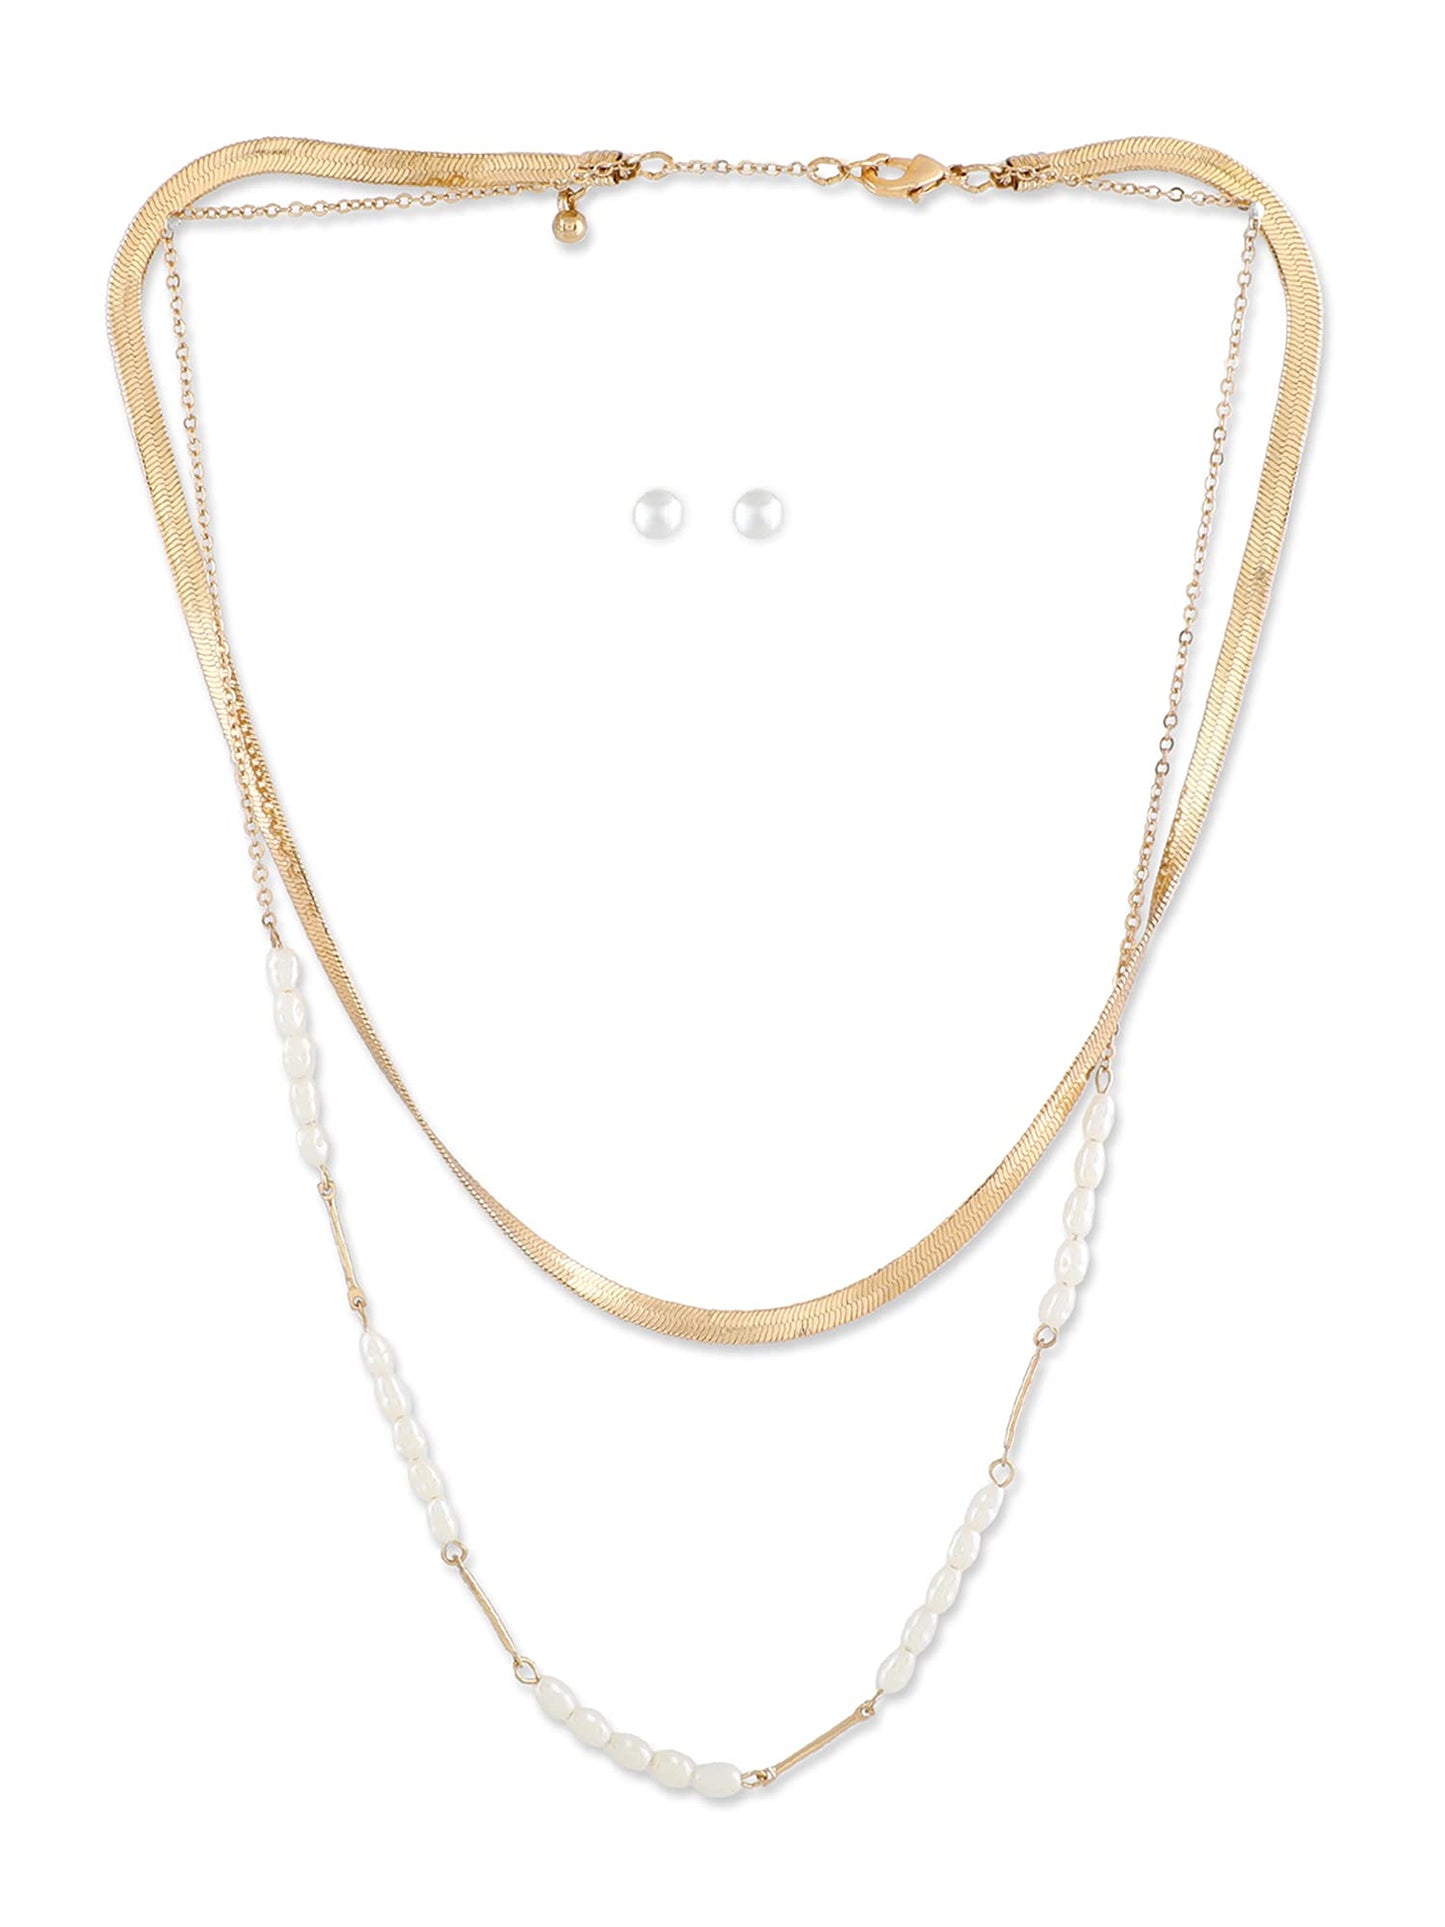 Zaveri Pearls Gold Tone Contemporary 2 Layers Pearl Necklace Chain With Earring-Zpfk10600